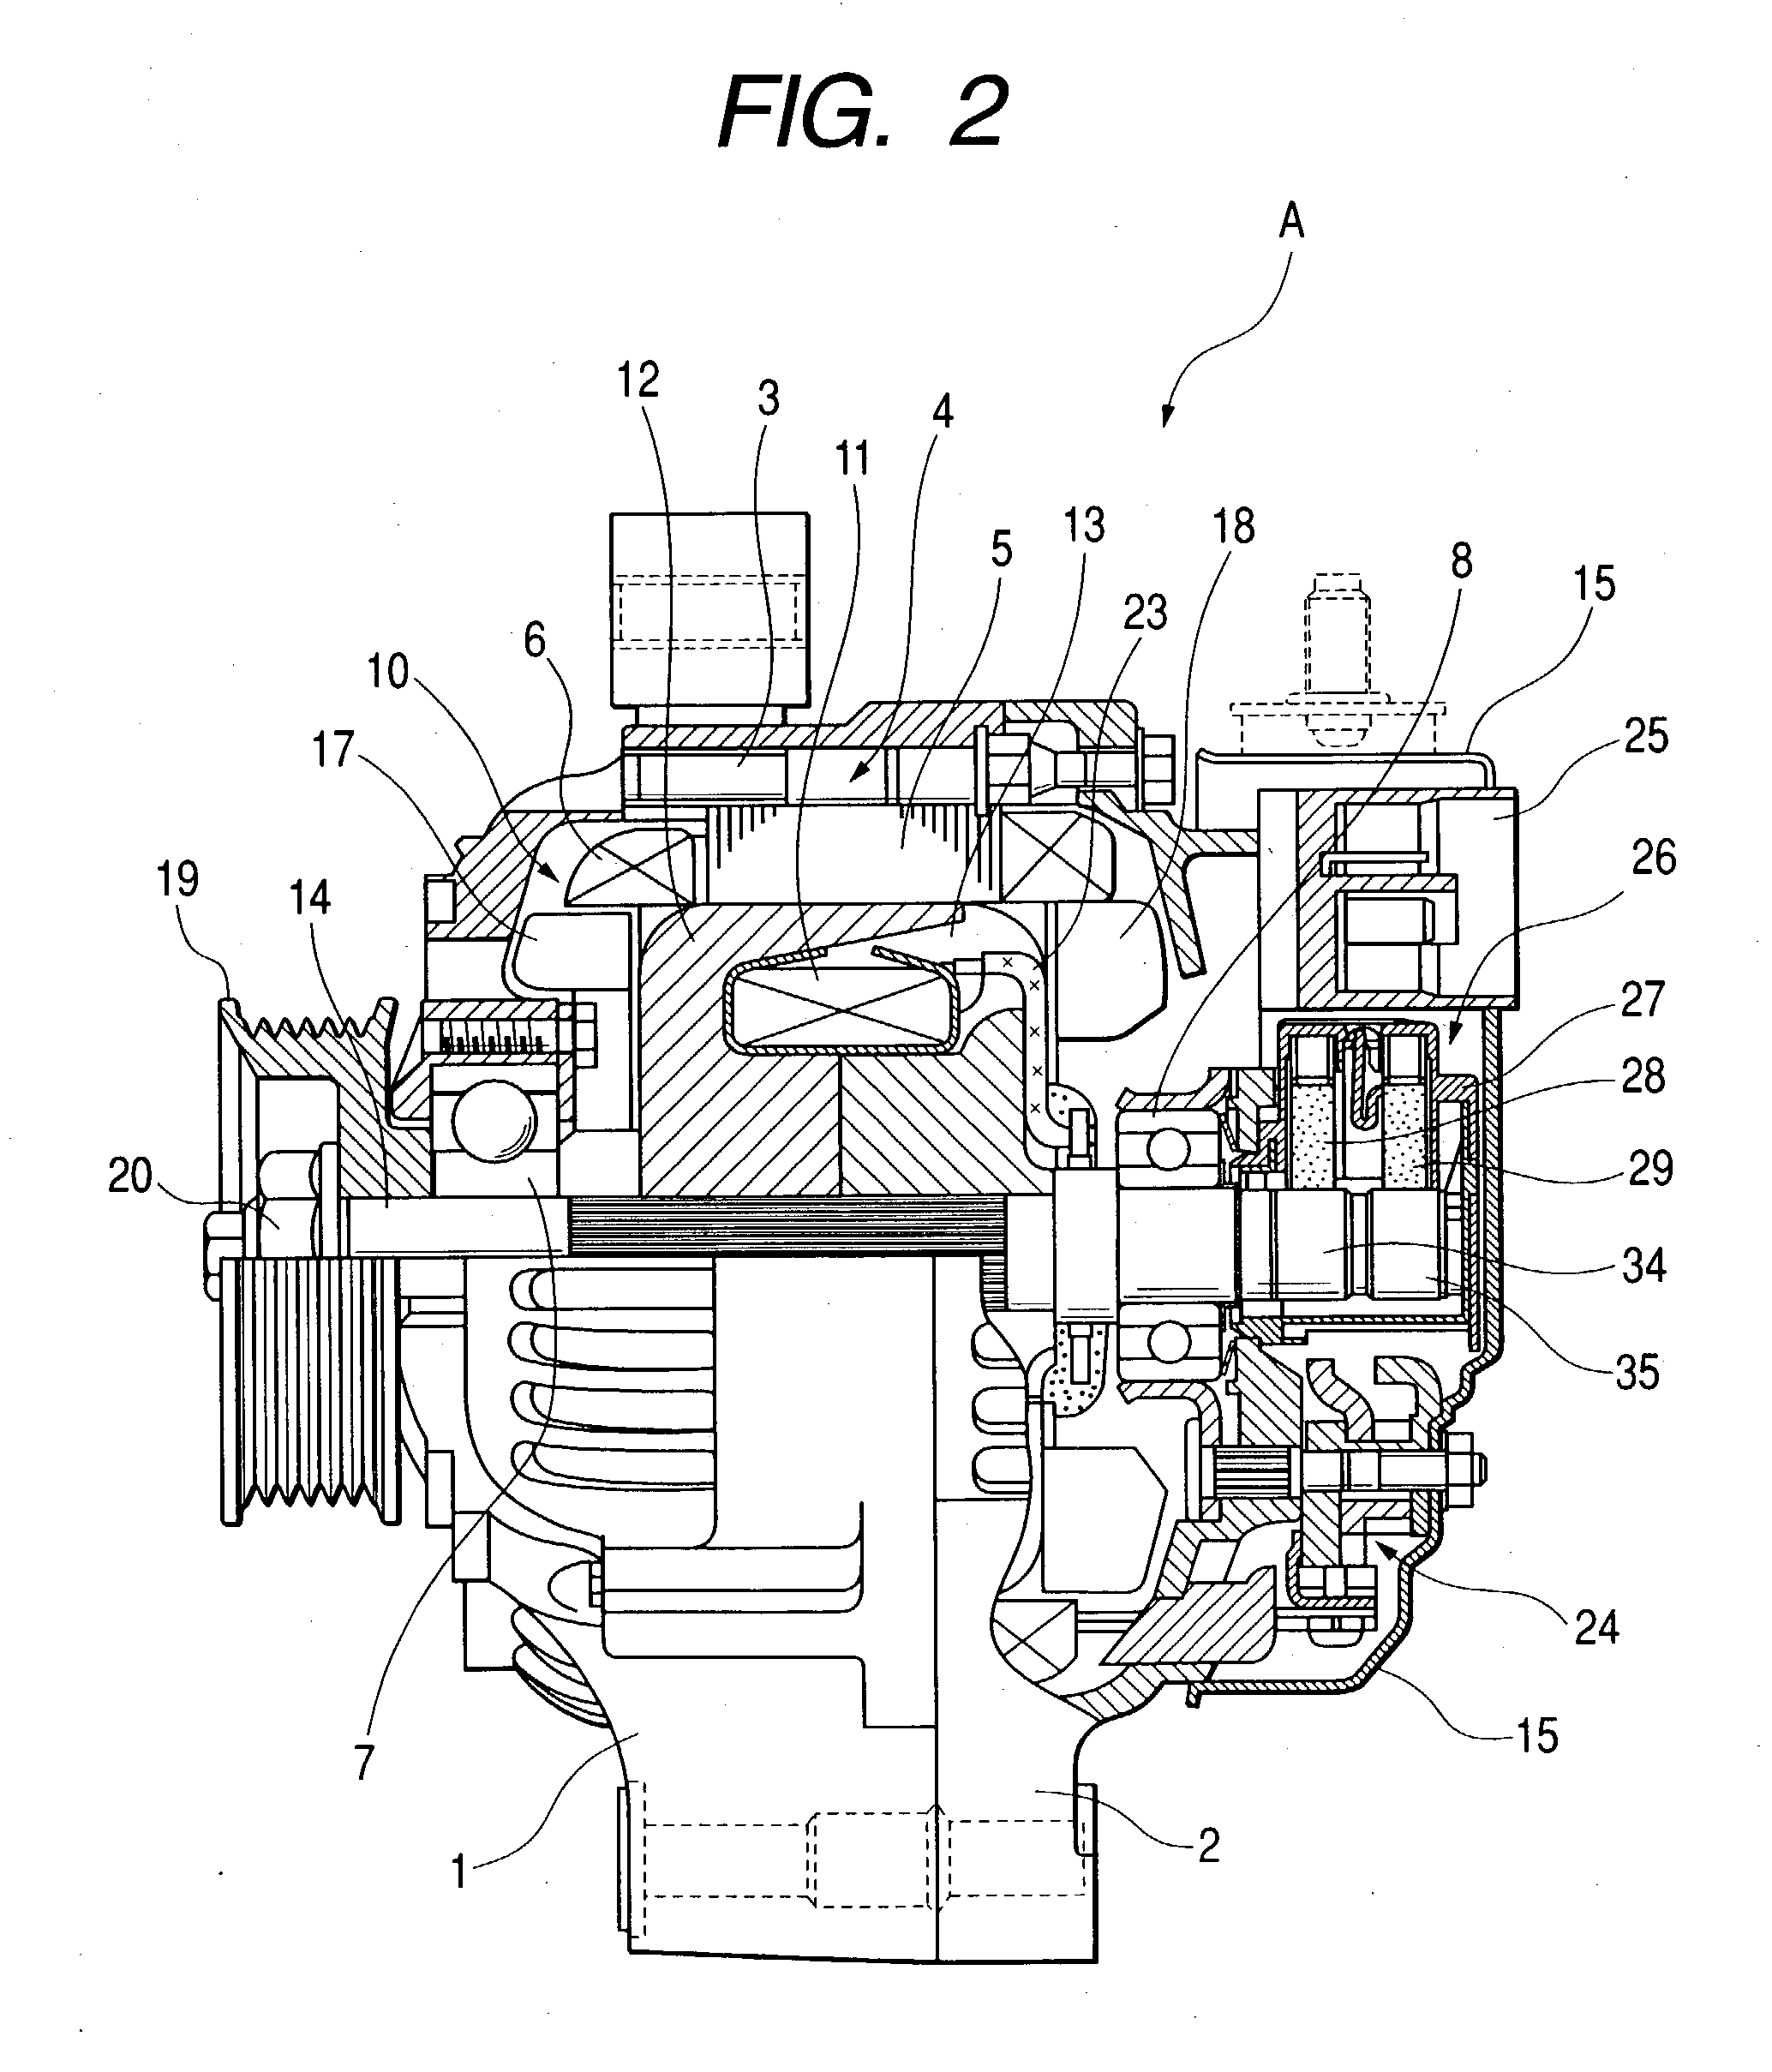 Brush support jig used in mounting a brush assembly of a rotary electric machine, and method of mounting the brush assembly using the brush support jig